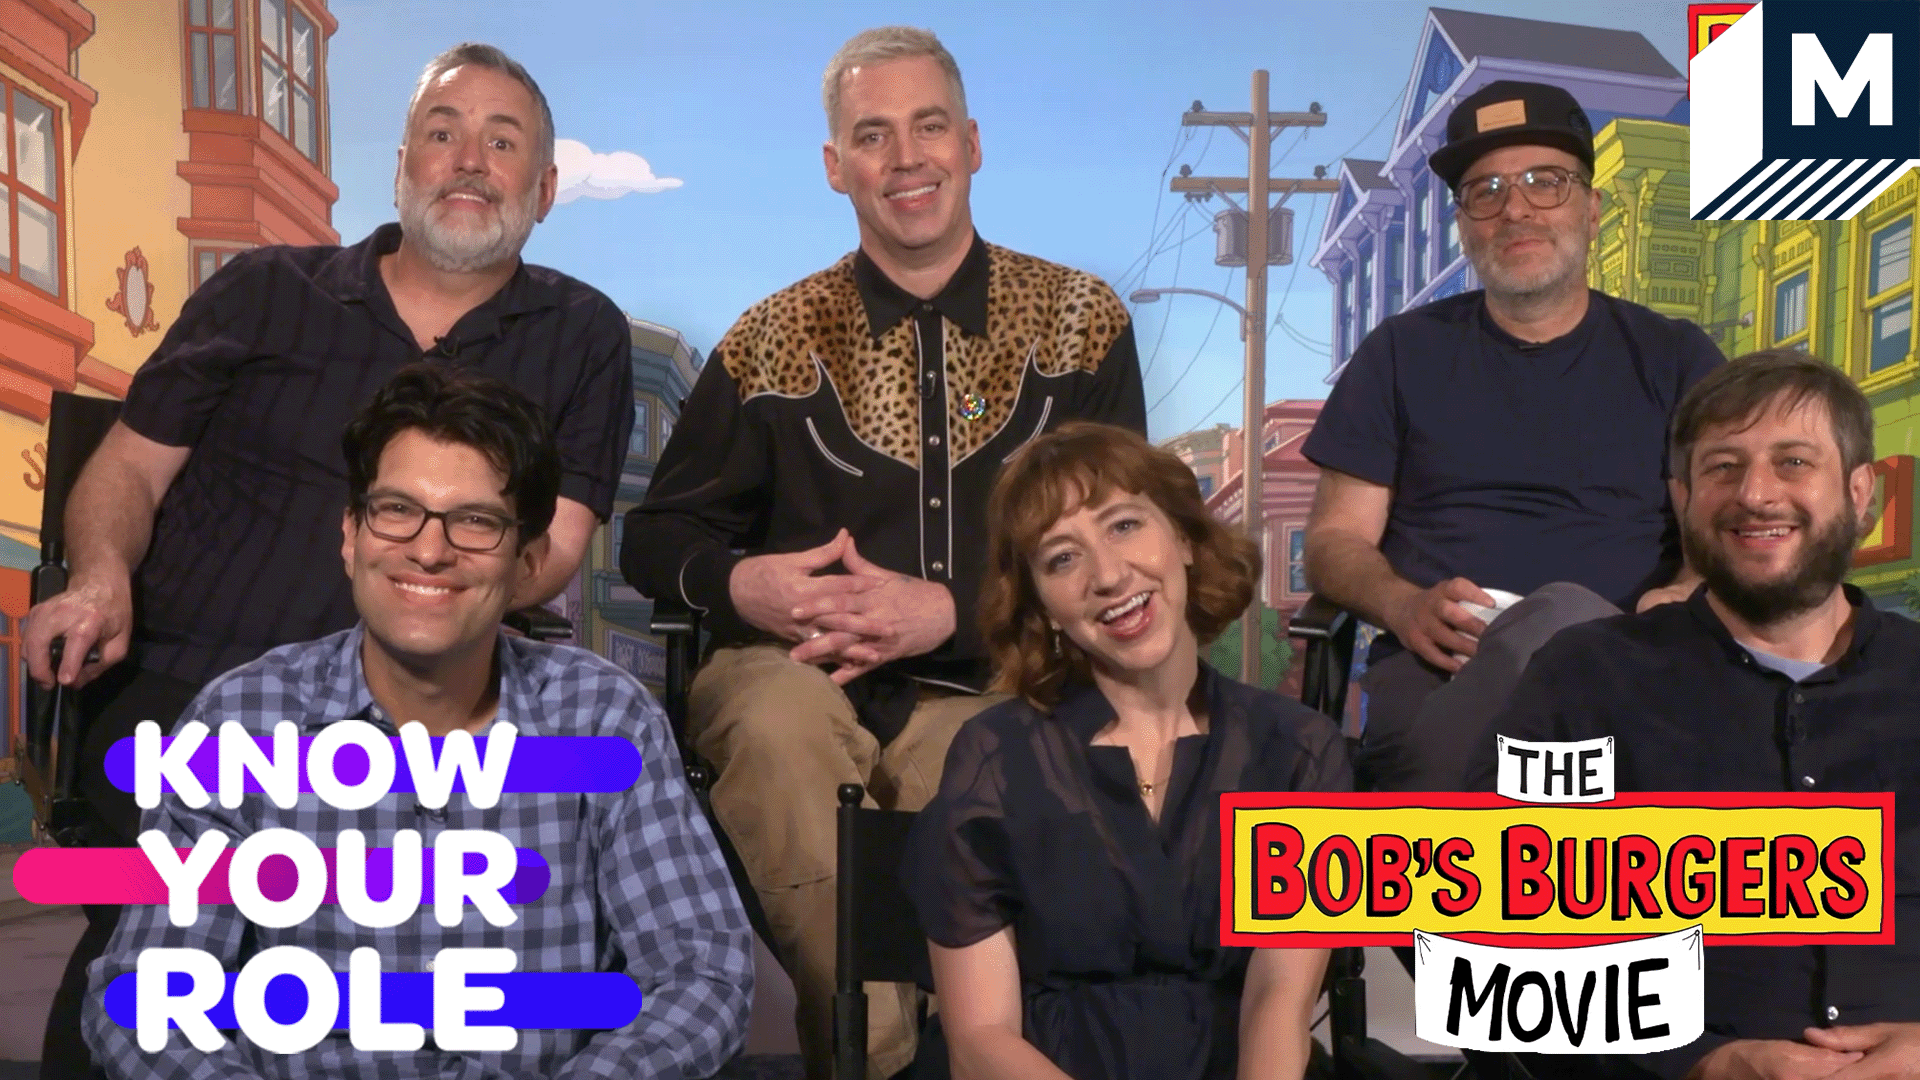 Bob's Burgers Cast smiling at the camera next to the title of The Bob's Burgers Movie and Know Your Role